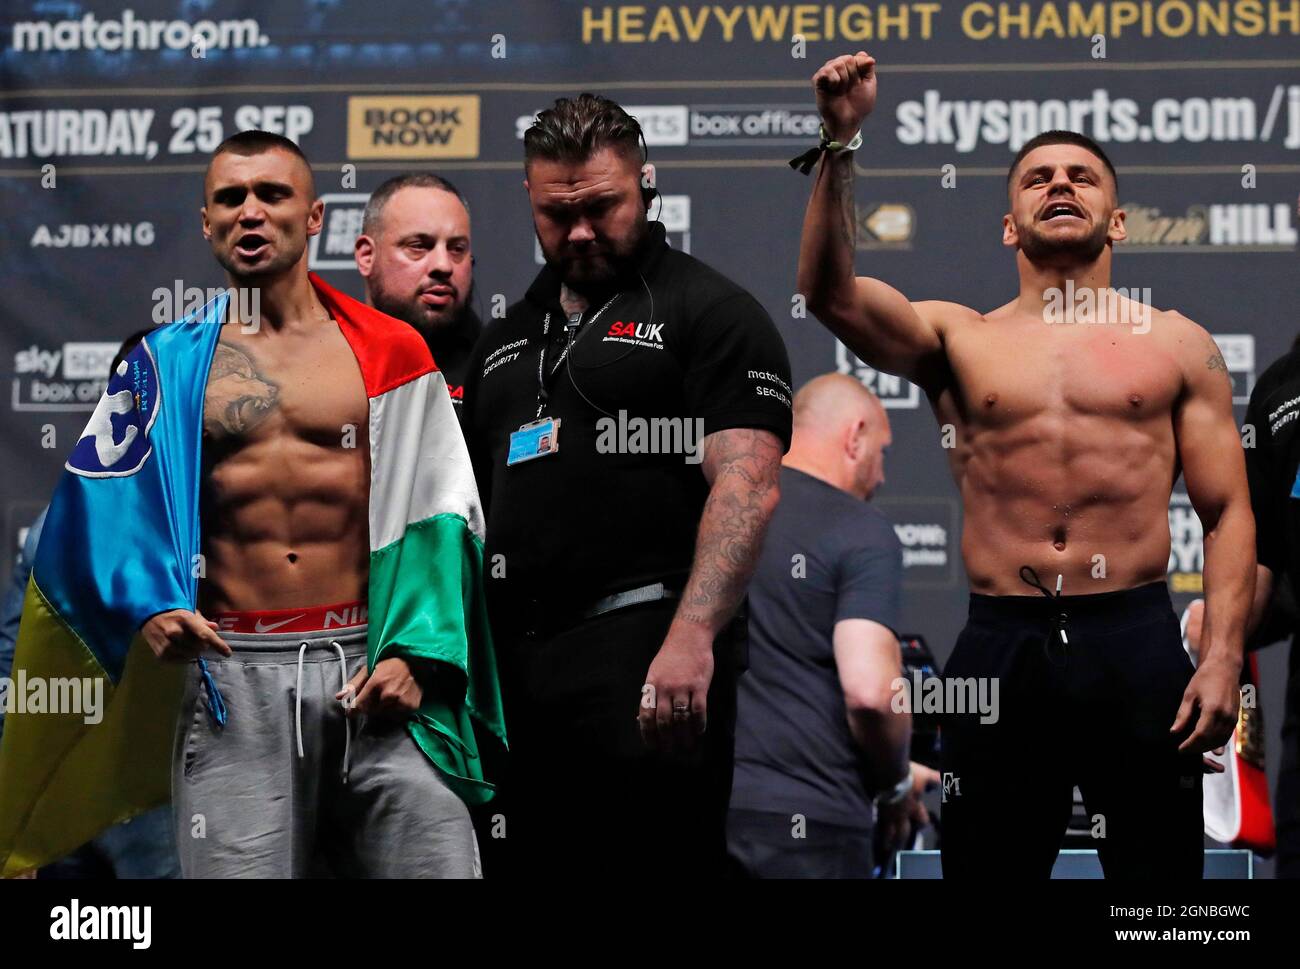 Boxing - Anthony Joshua v Oleksandr Usyk Weigh-in - The O2, London, Britain  - September 24, 2021 Maxim Prodan and Florian Marku during the weigh-in  Action Images via Reuters/Andrew Couldridge Stock Photo - Alamy